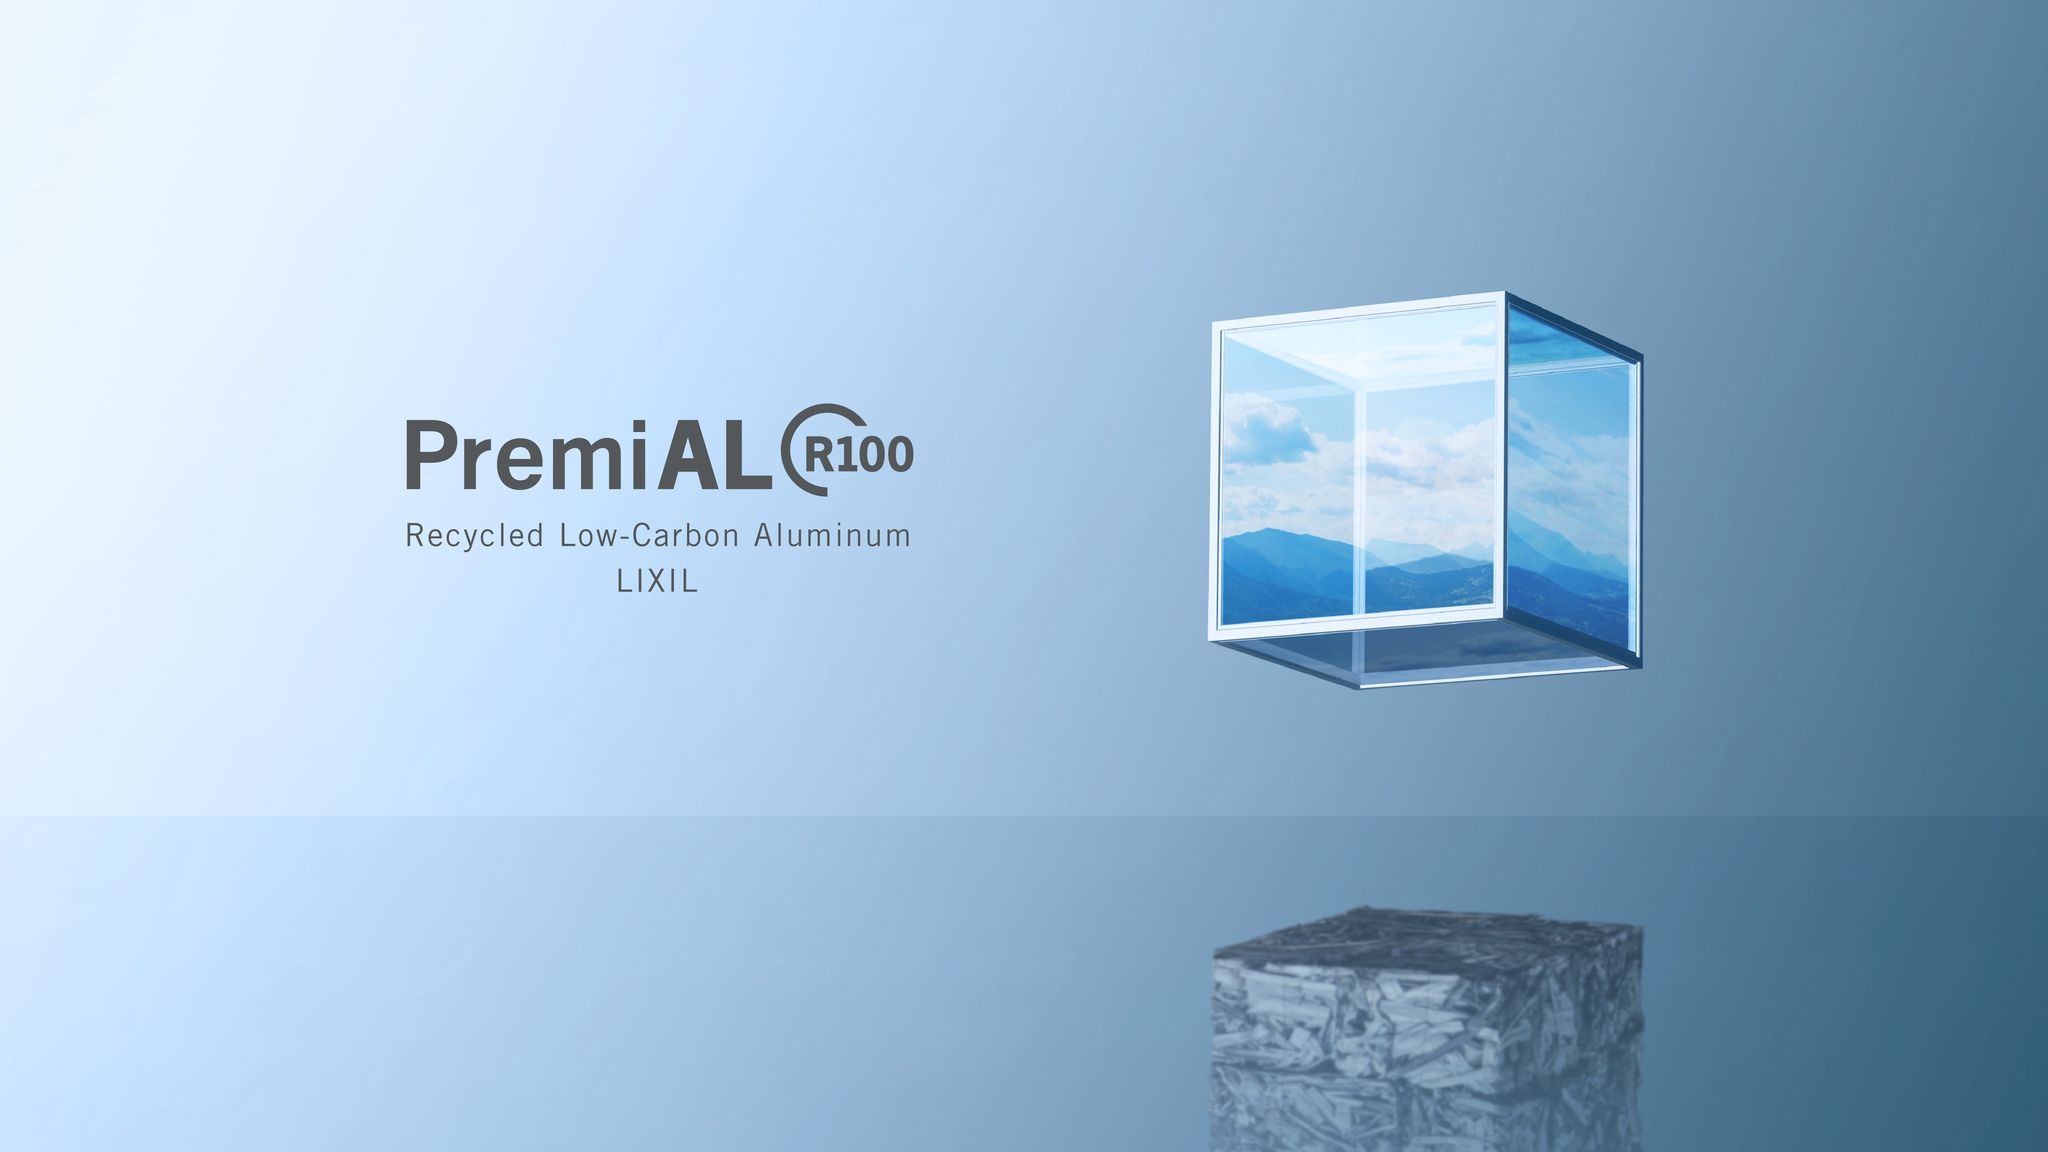 LIXIL Introduces PremiAL R100, Japan’s First¹ 100% Recycled Aluminum Building Material for Pre-order サムネイル画像